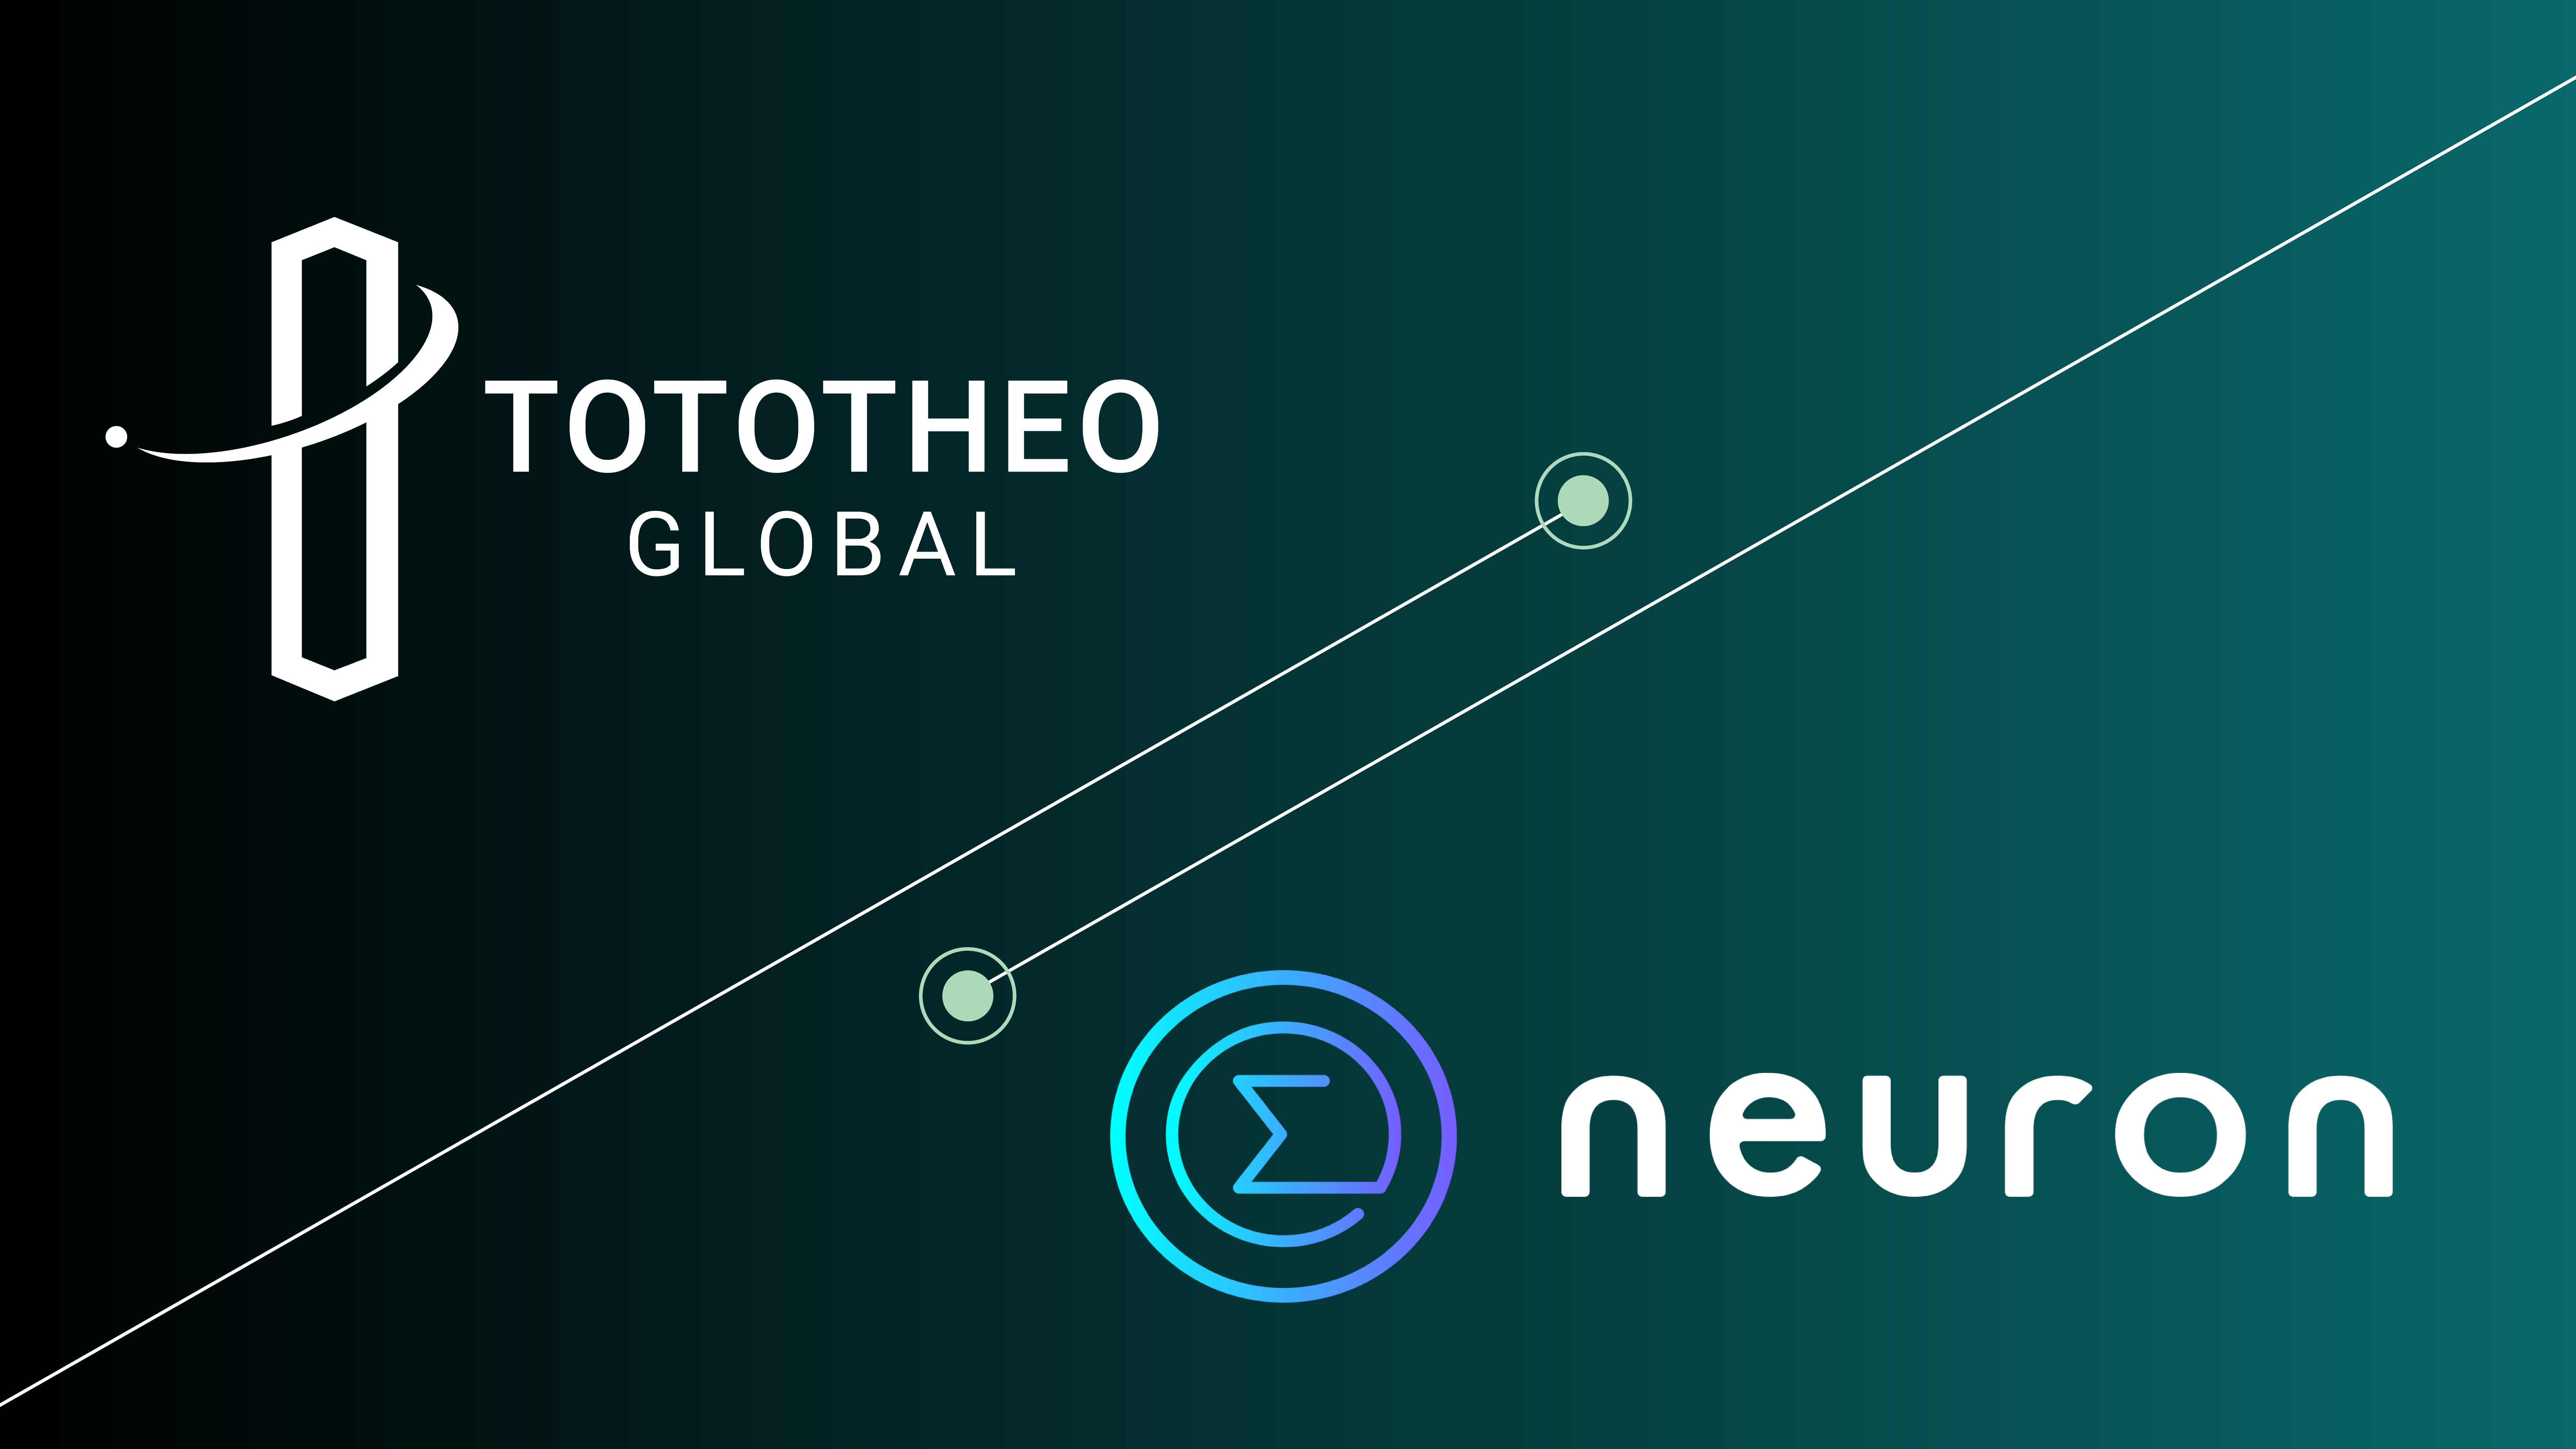 Tototheo Global and Neuron partner to bring AI-optimised multi-provider satellite connectivity to the maritime industry